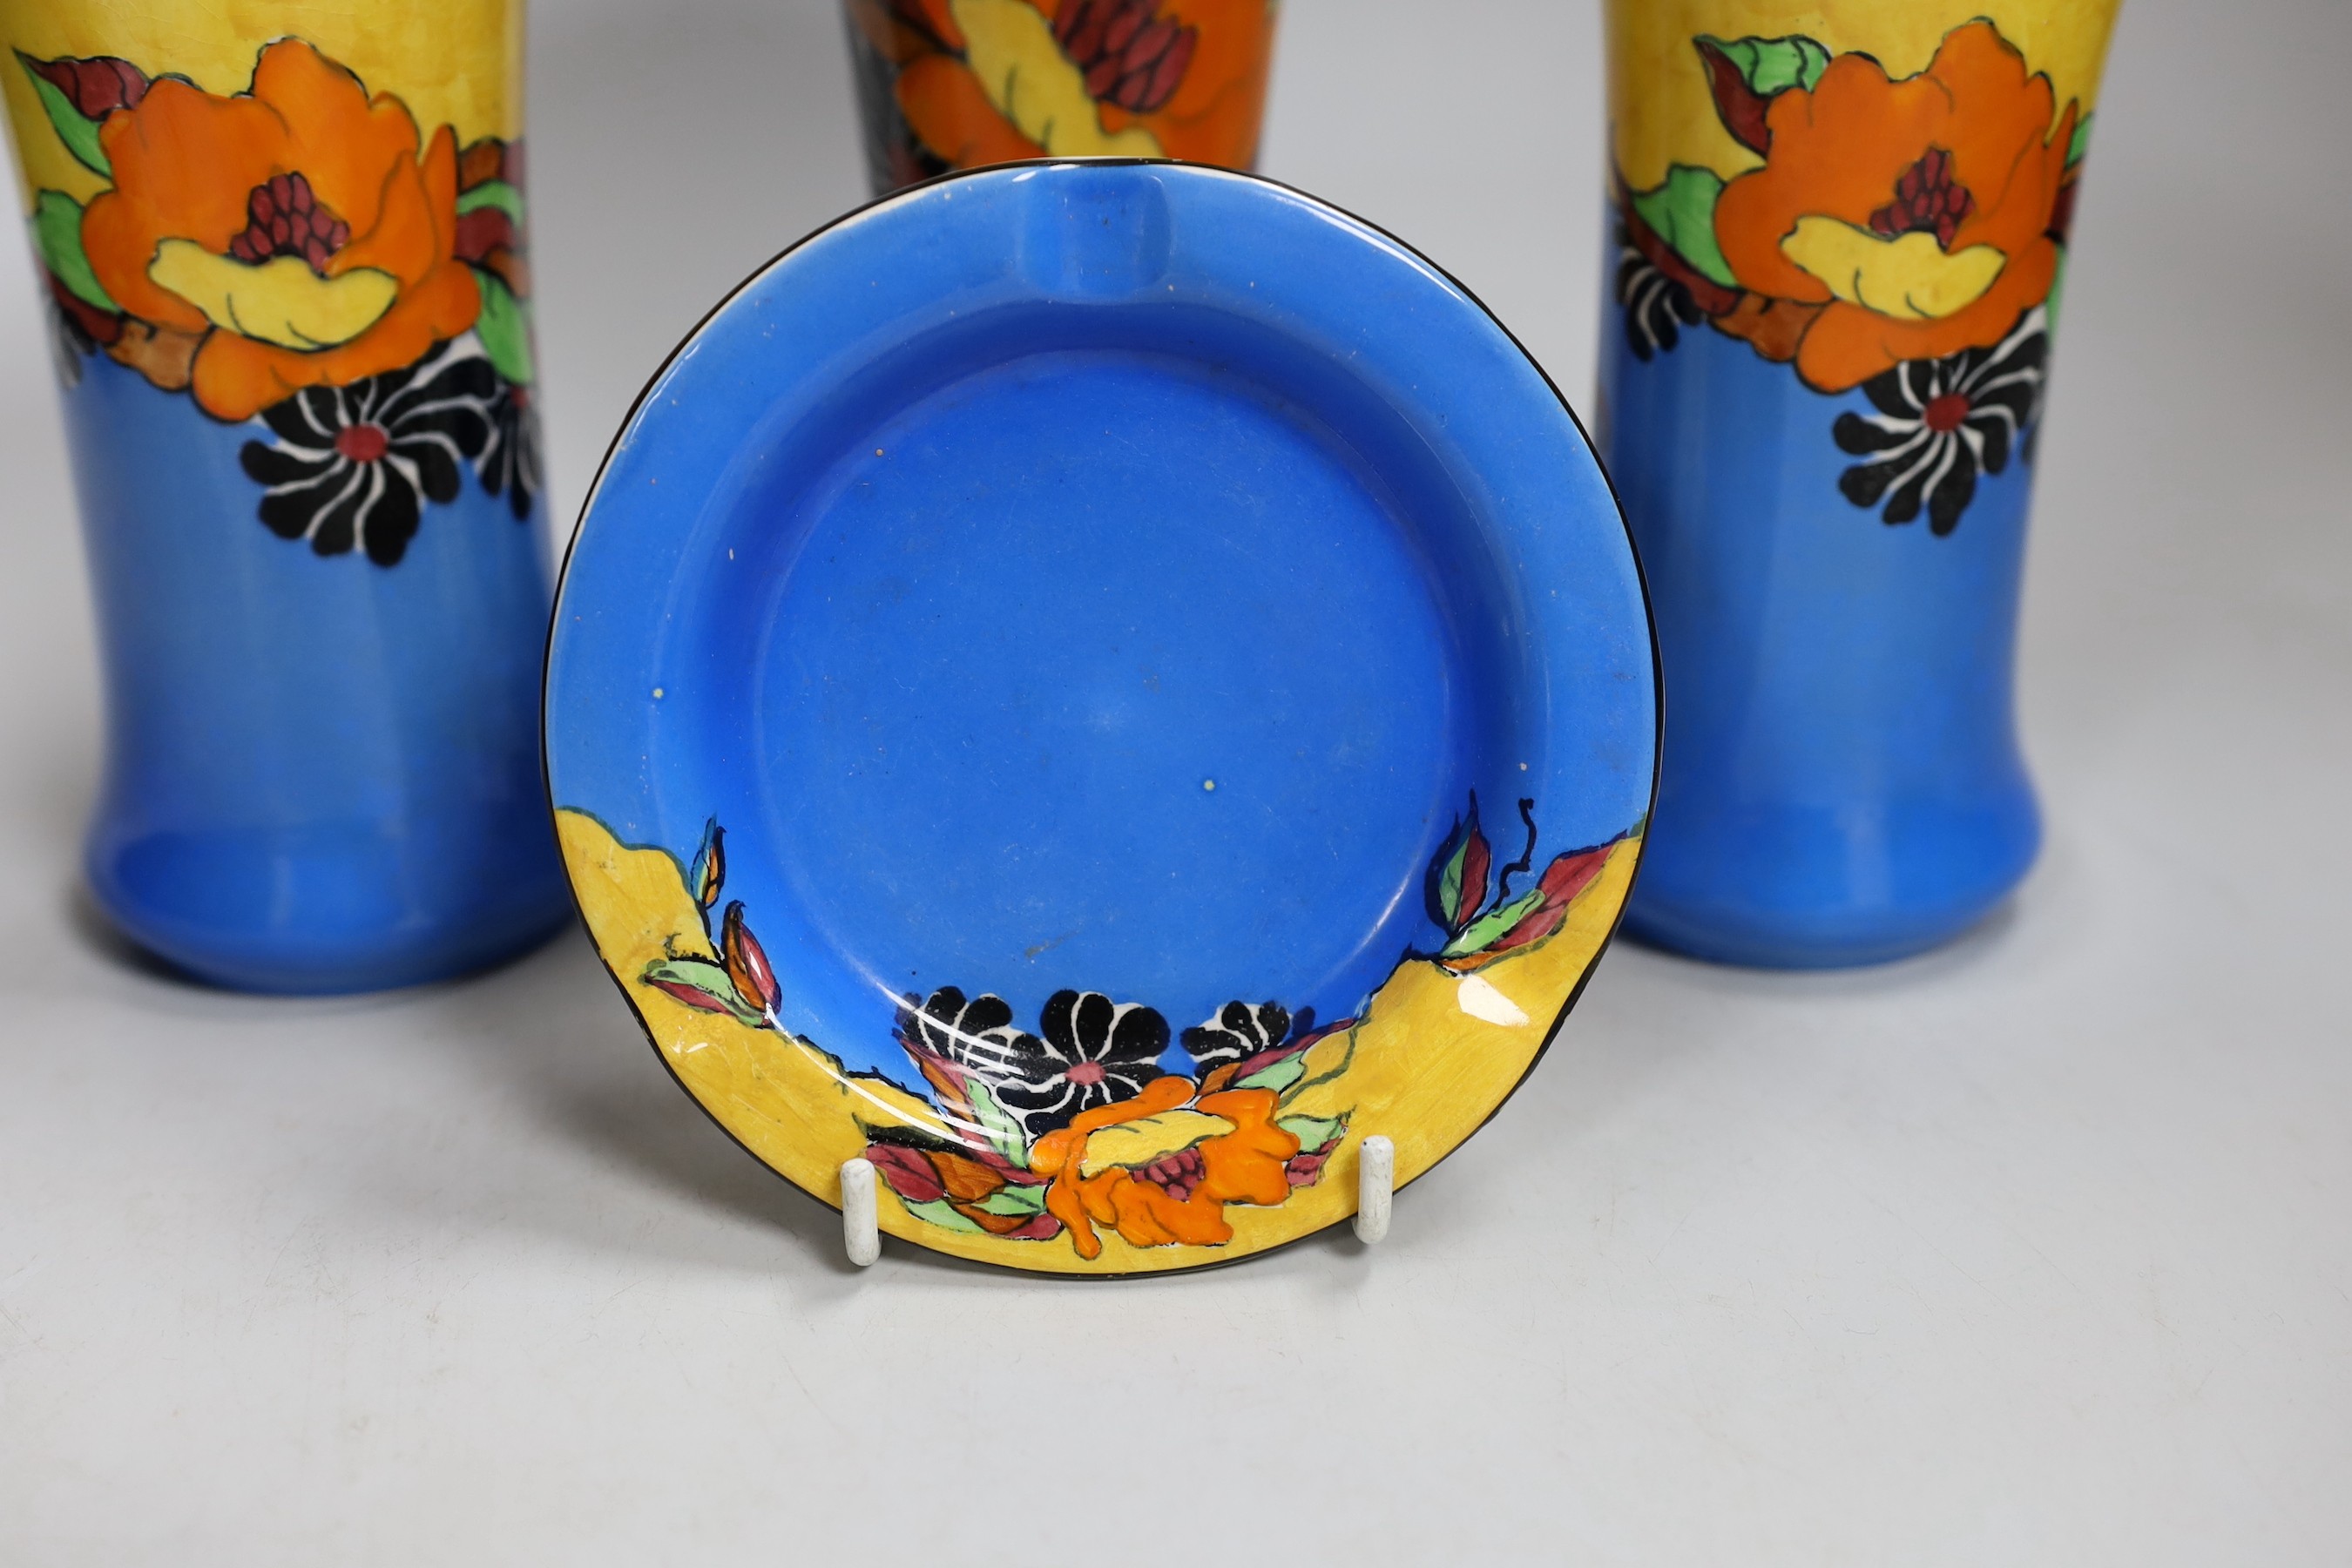 Wilkinson's Indian Summer group of three vases and an ash tray